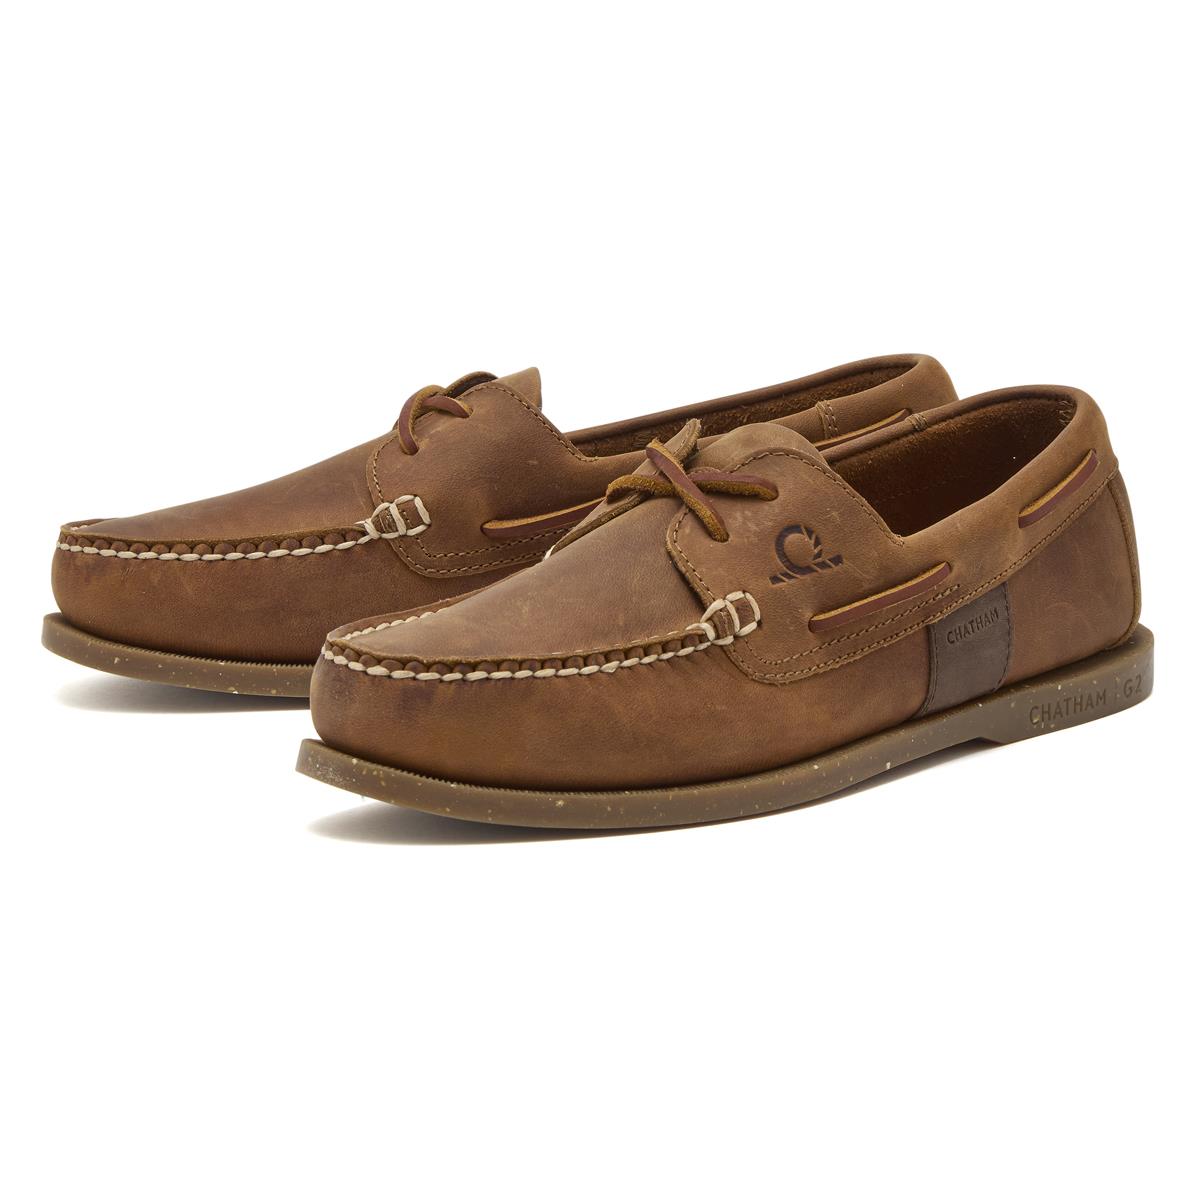 Are deck shoes the same as boat shoes?